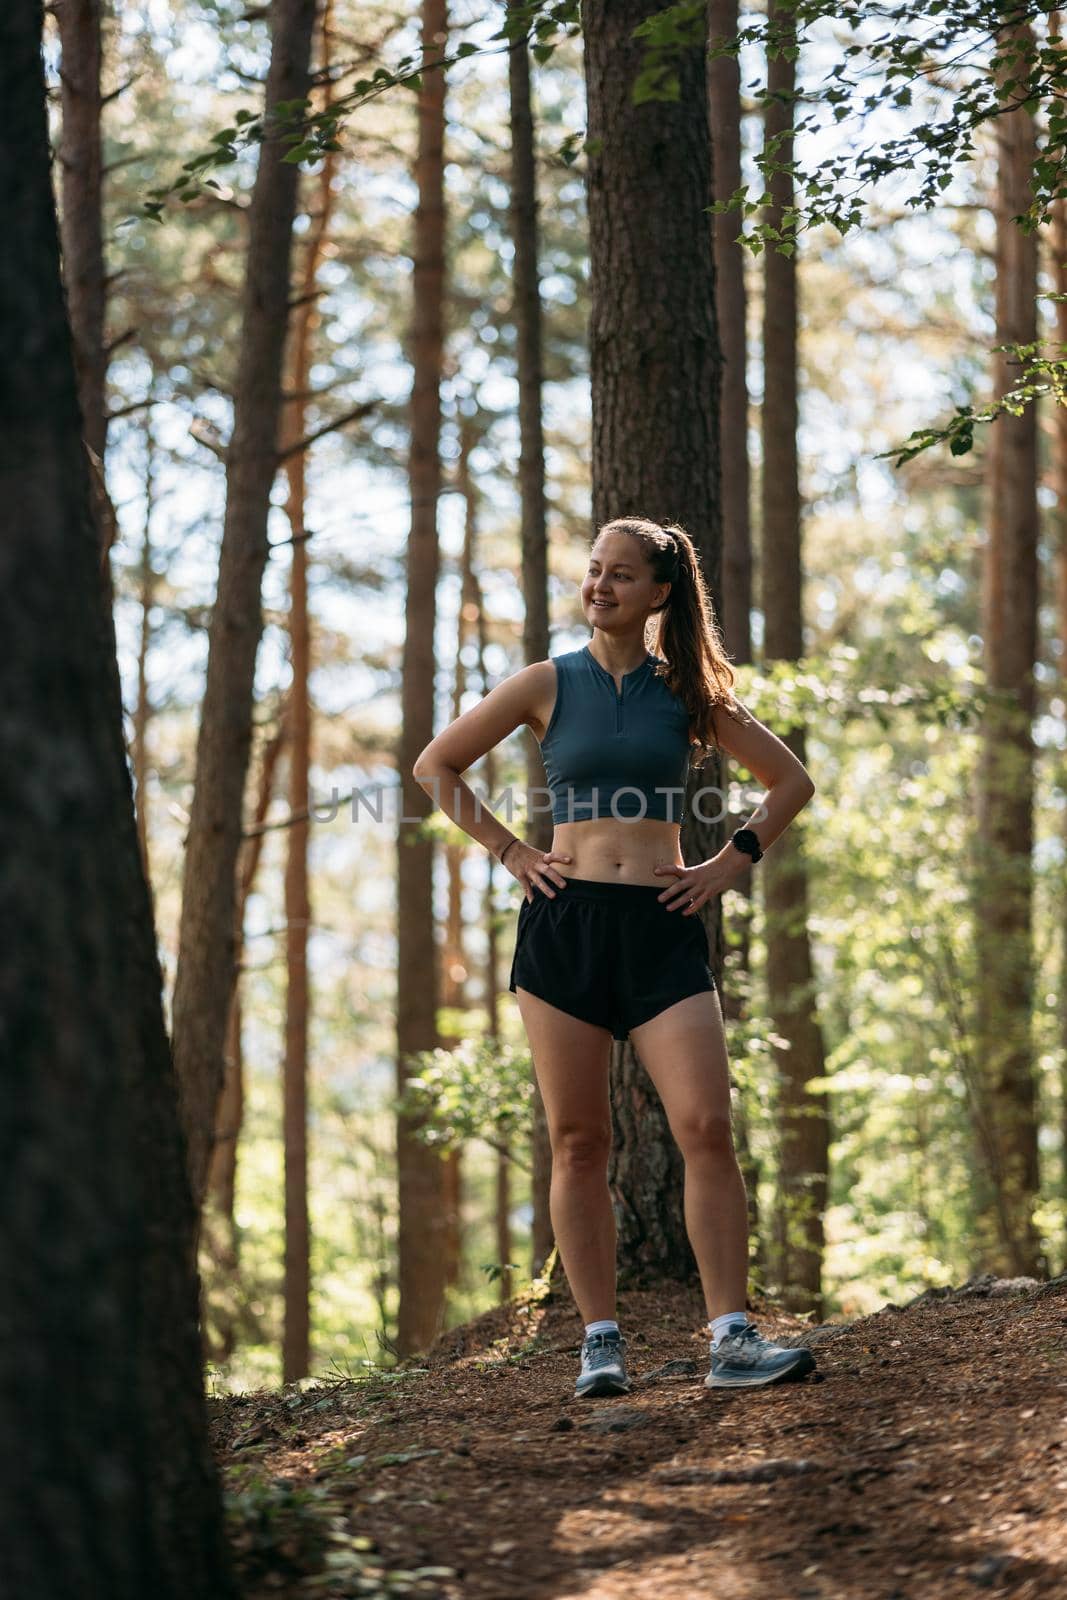 Happy girl practice trial running in the morning forest. Concept of sports and fitness relaxation in nature.